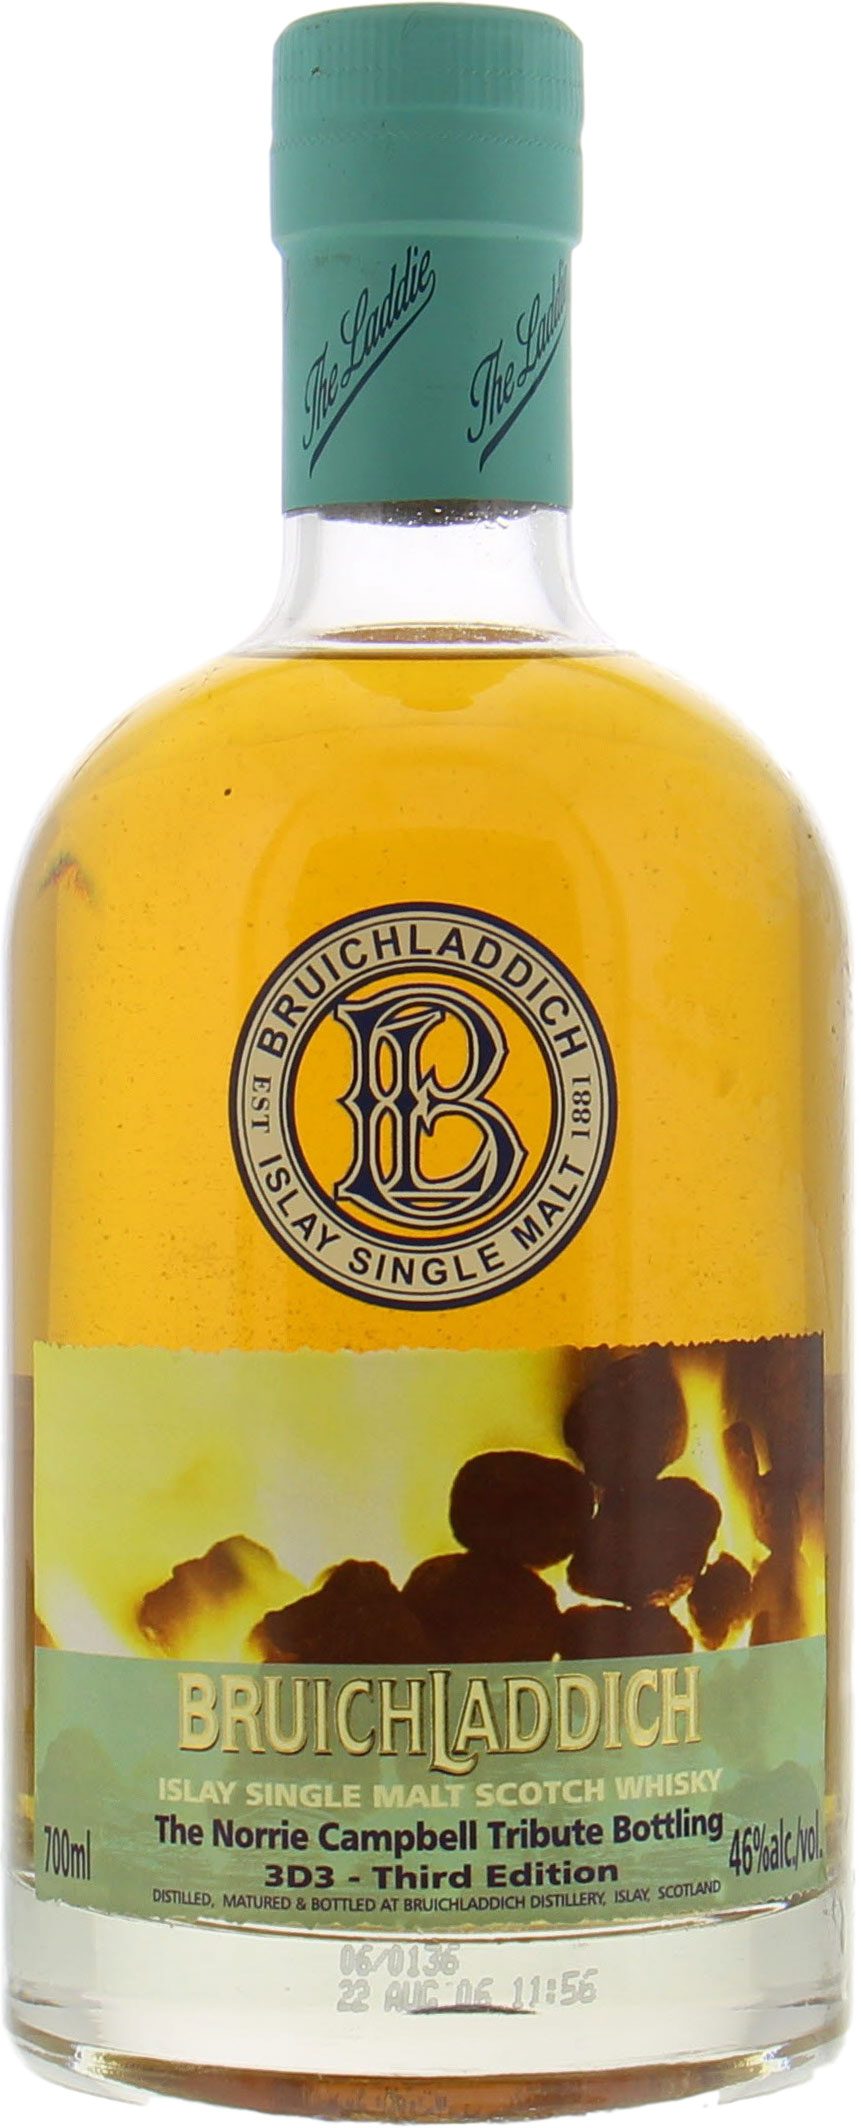 Bruichladdich - 3D3 Third Edition The Norrie Campbell Tribute Bottling 46% NV